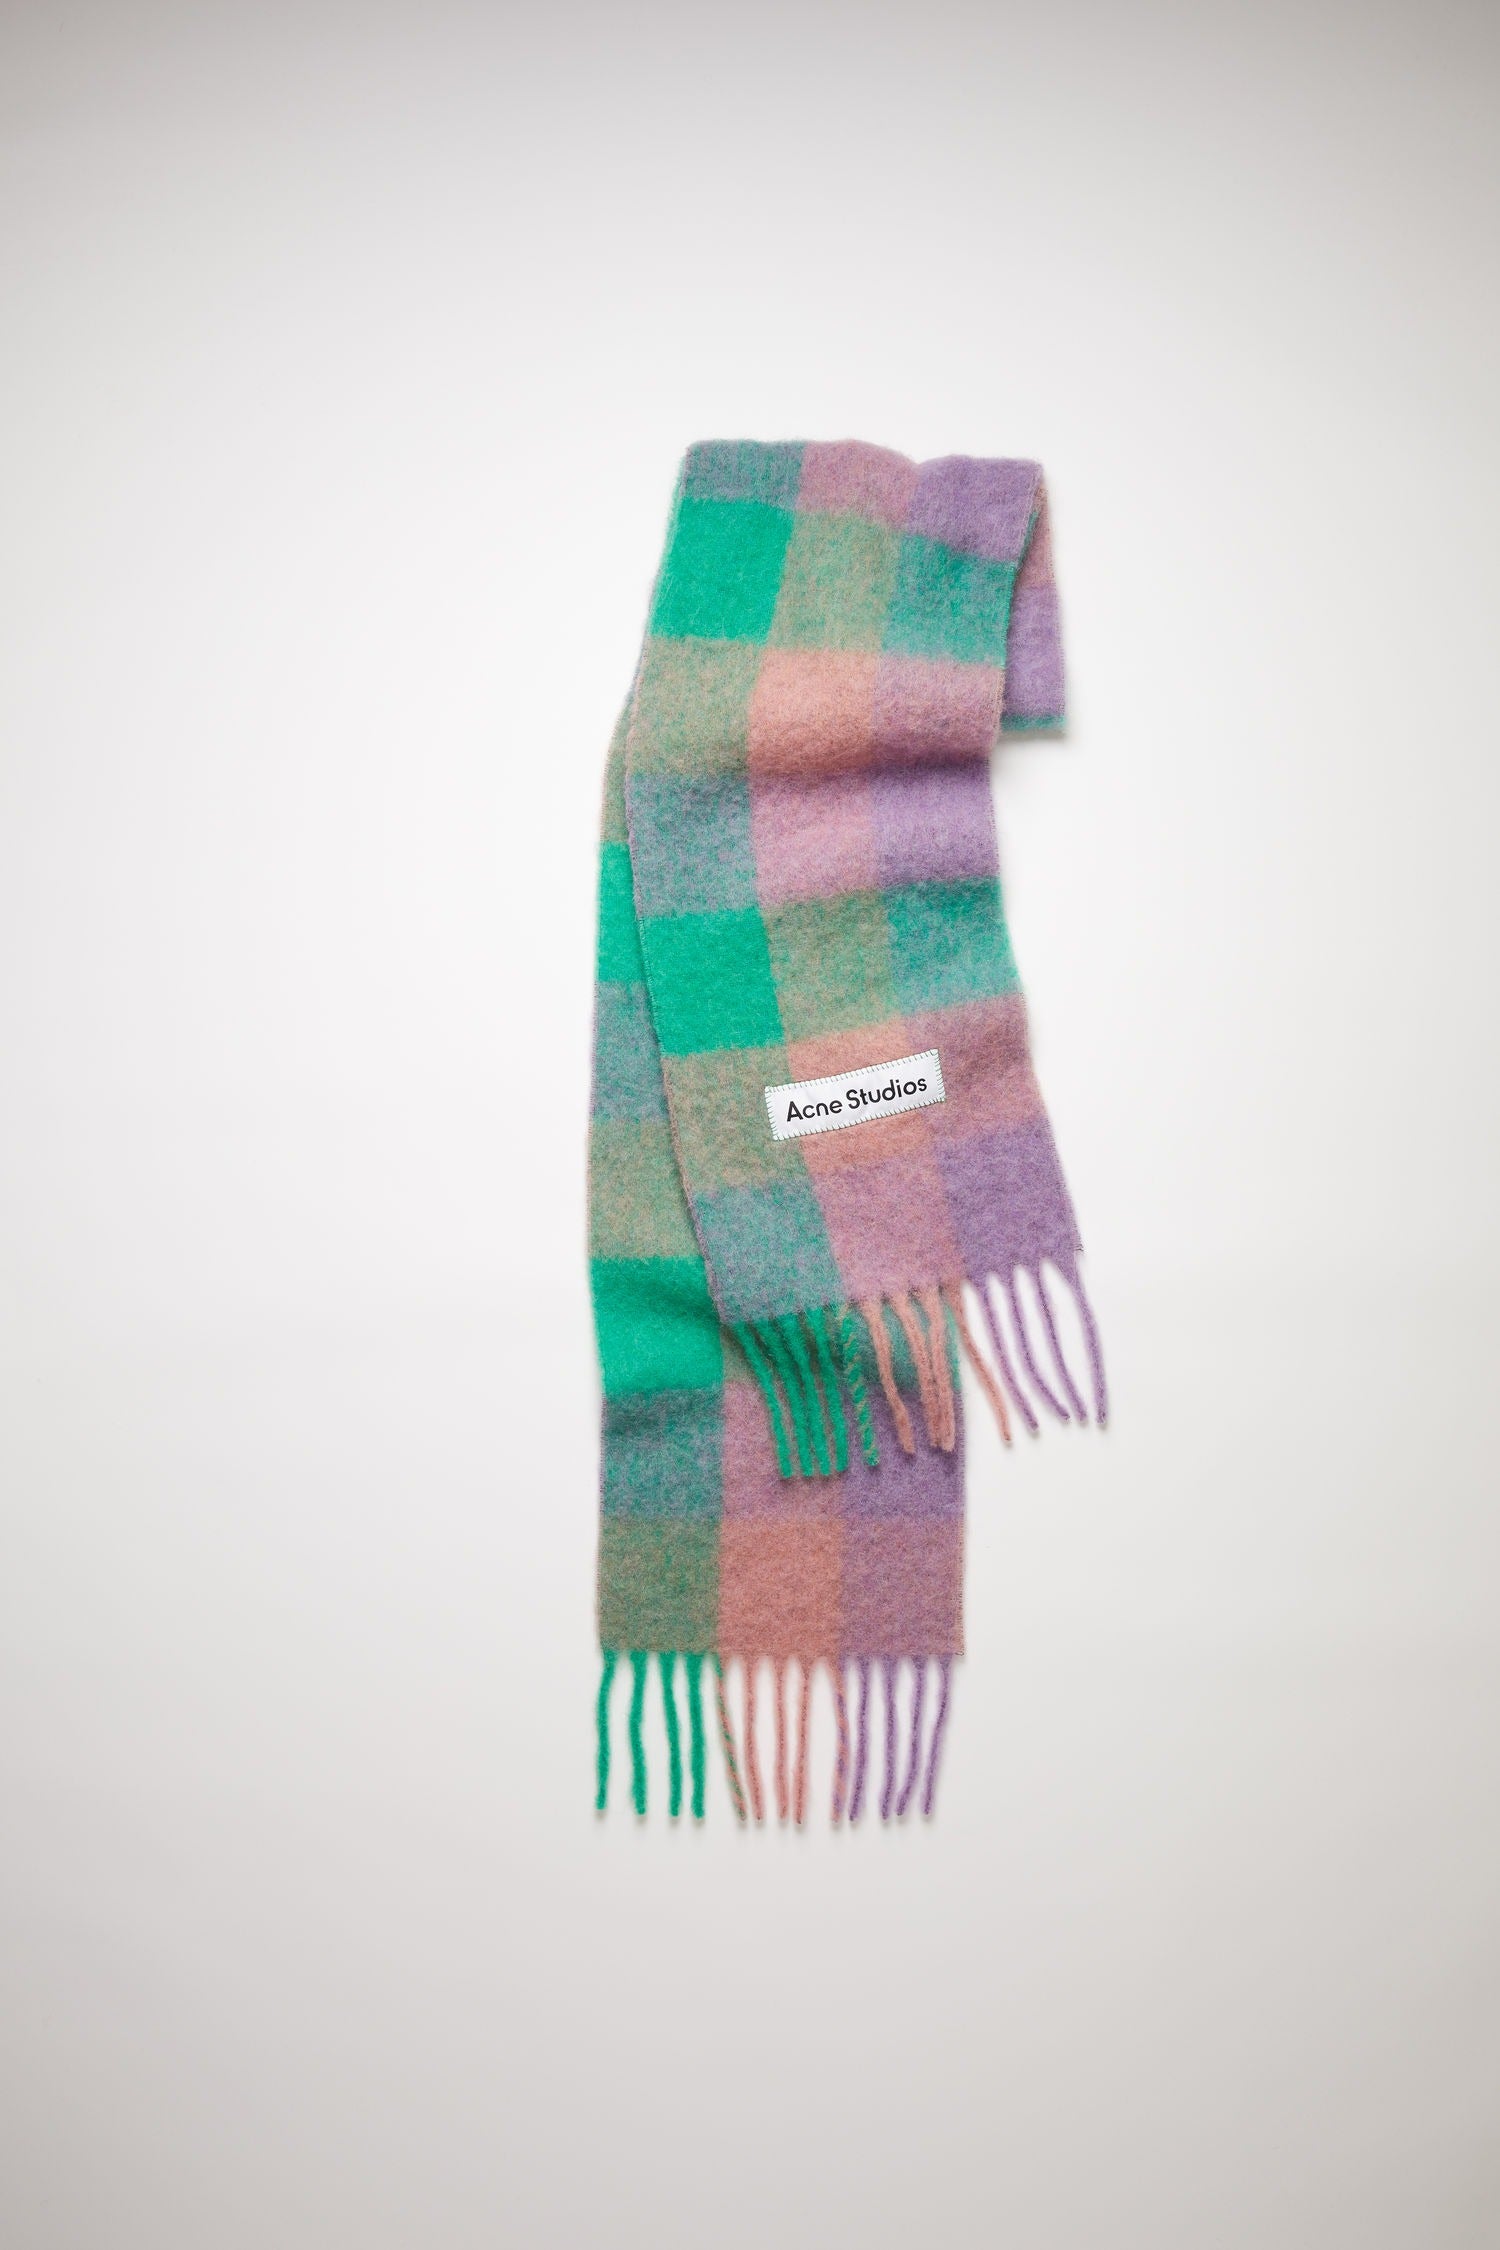 Acne Studios + Large check scarf lilac purple/green/pink